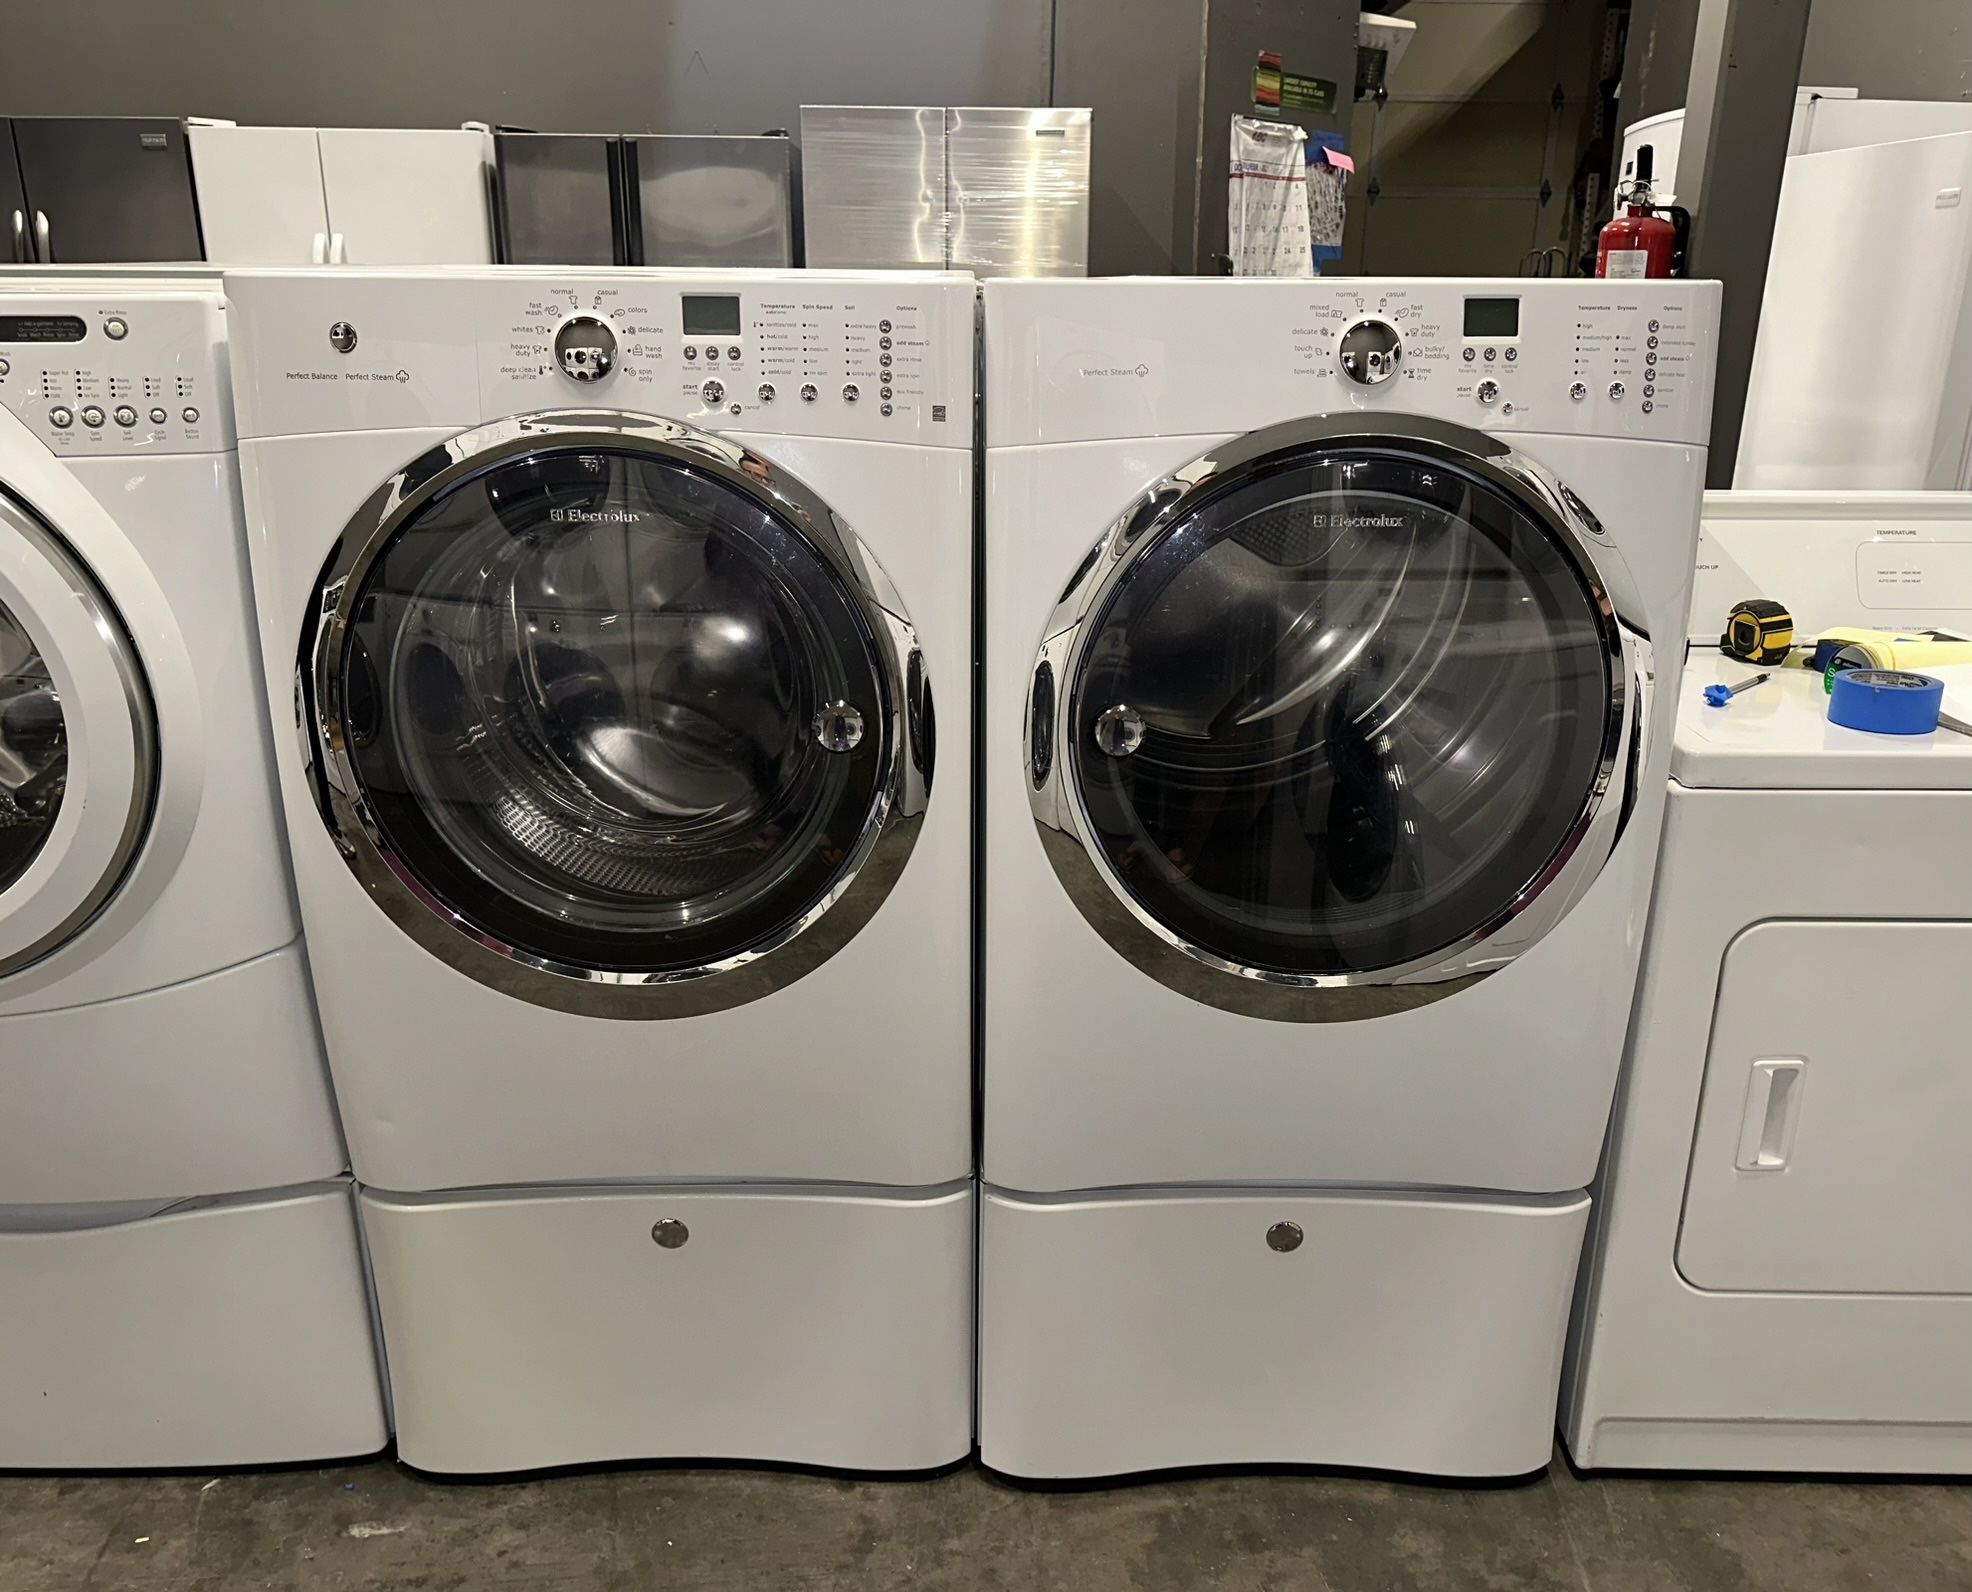 ELECTROLUX XL CAPACITY WASHER DRYER STEAM ELECTRIC SET 